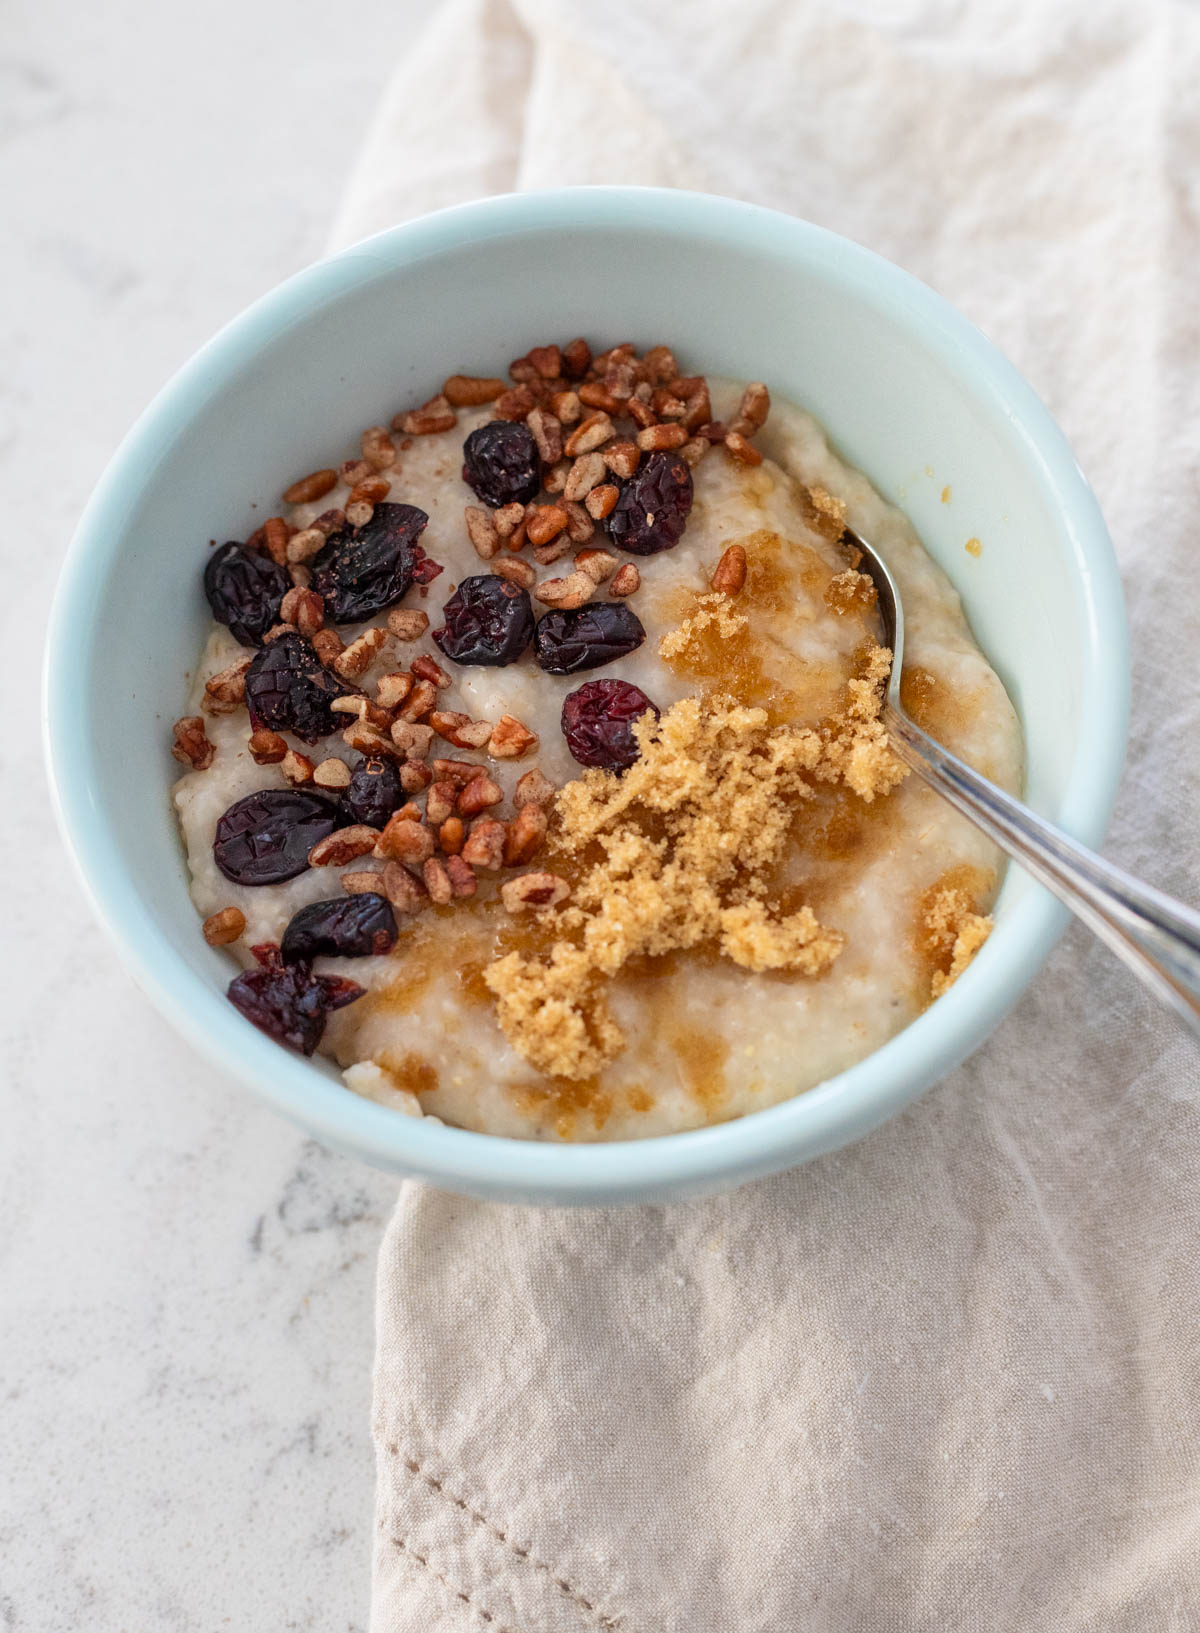 A bowl of creamy oatmeal with craisins, chopped pecans, and brown sugar on top.